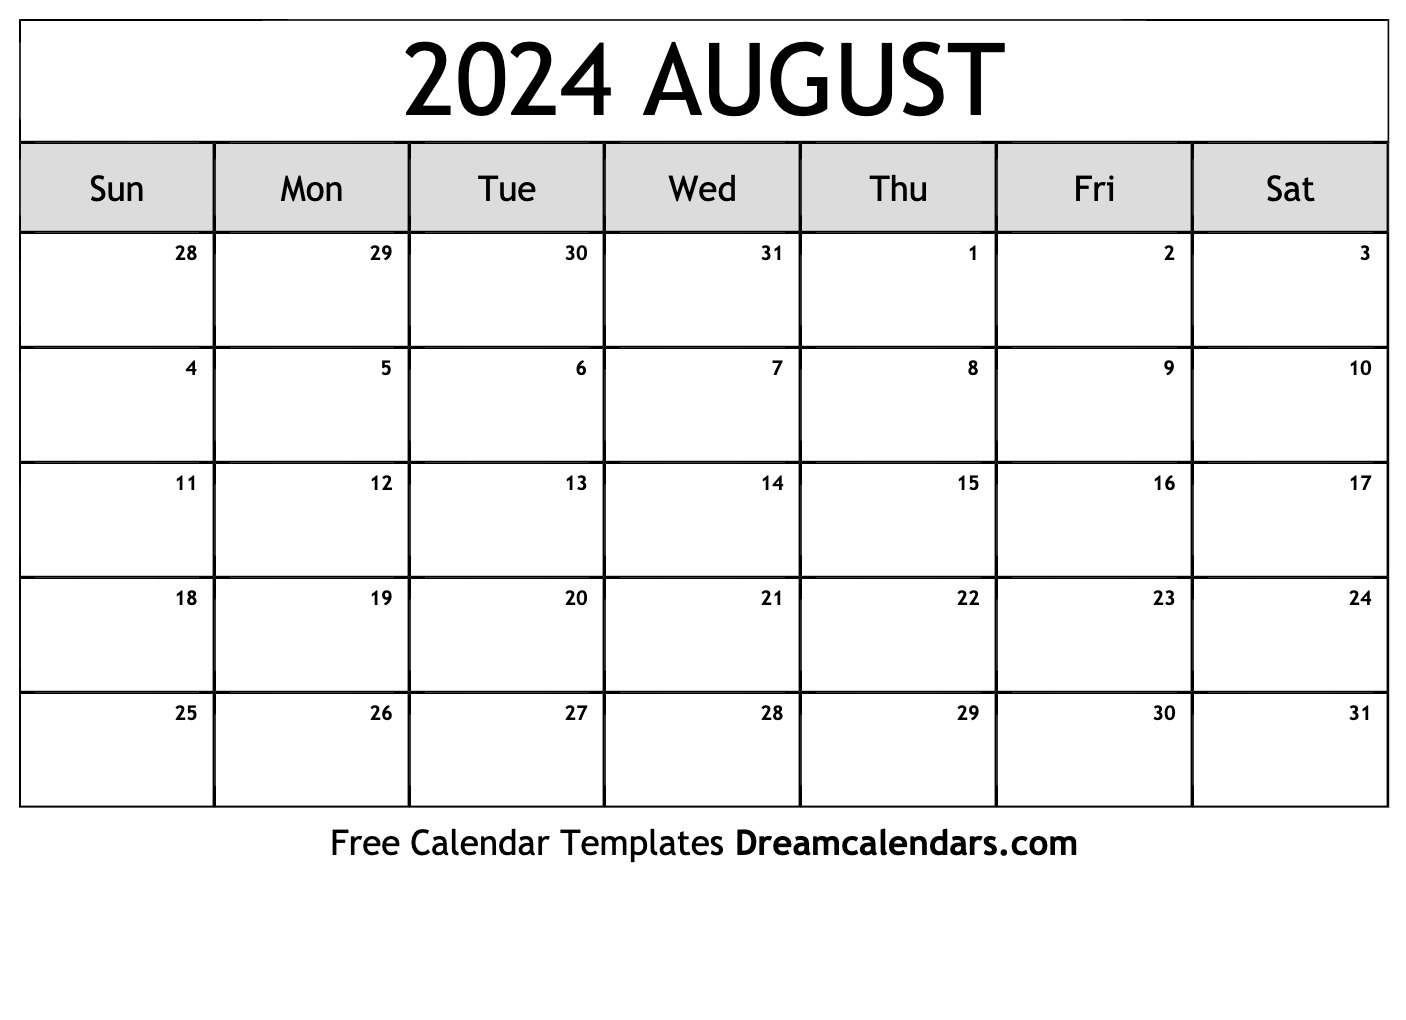 August 2024 Calendar | Free Blank Printable With Holidays for August Calendar 2024 Printable